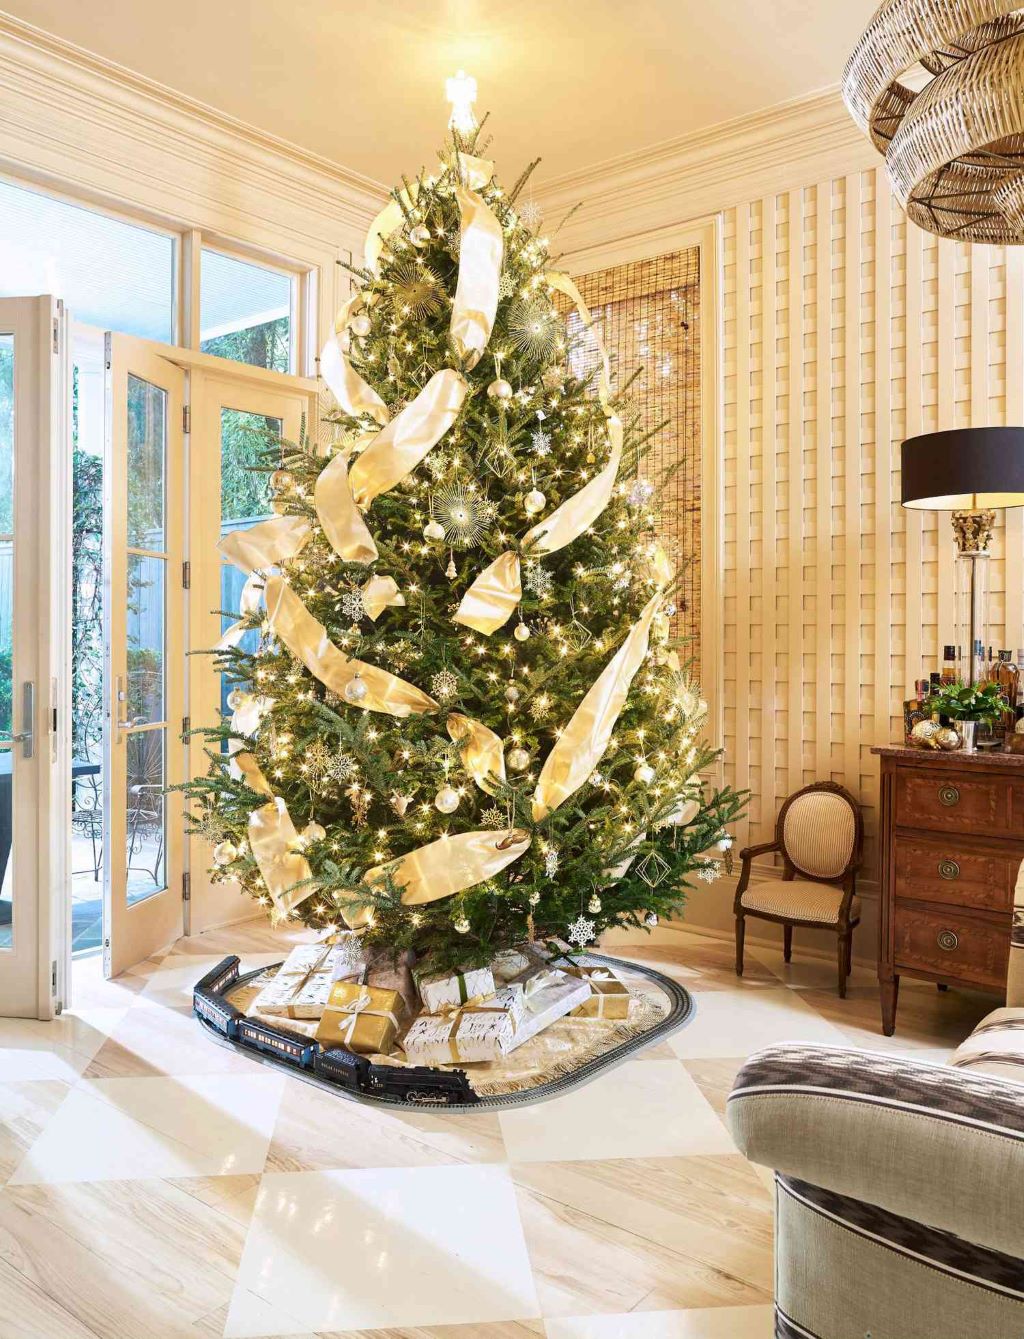 The Tree - The Focal Gold and White Christmas Decor Point